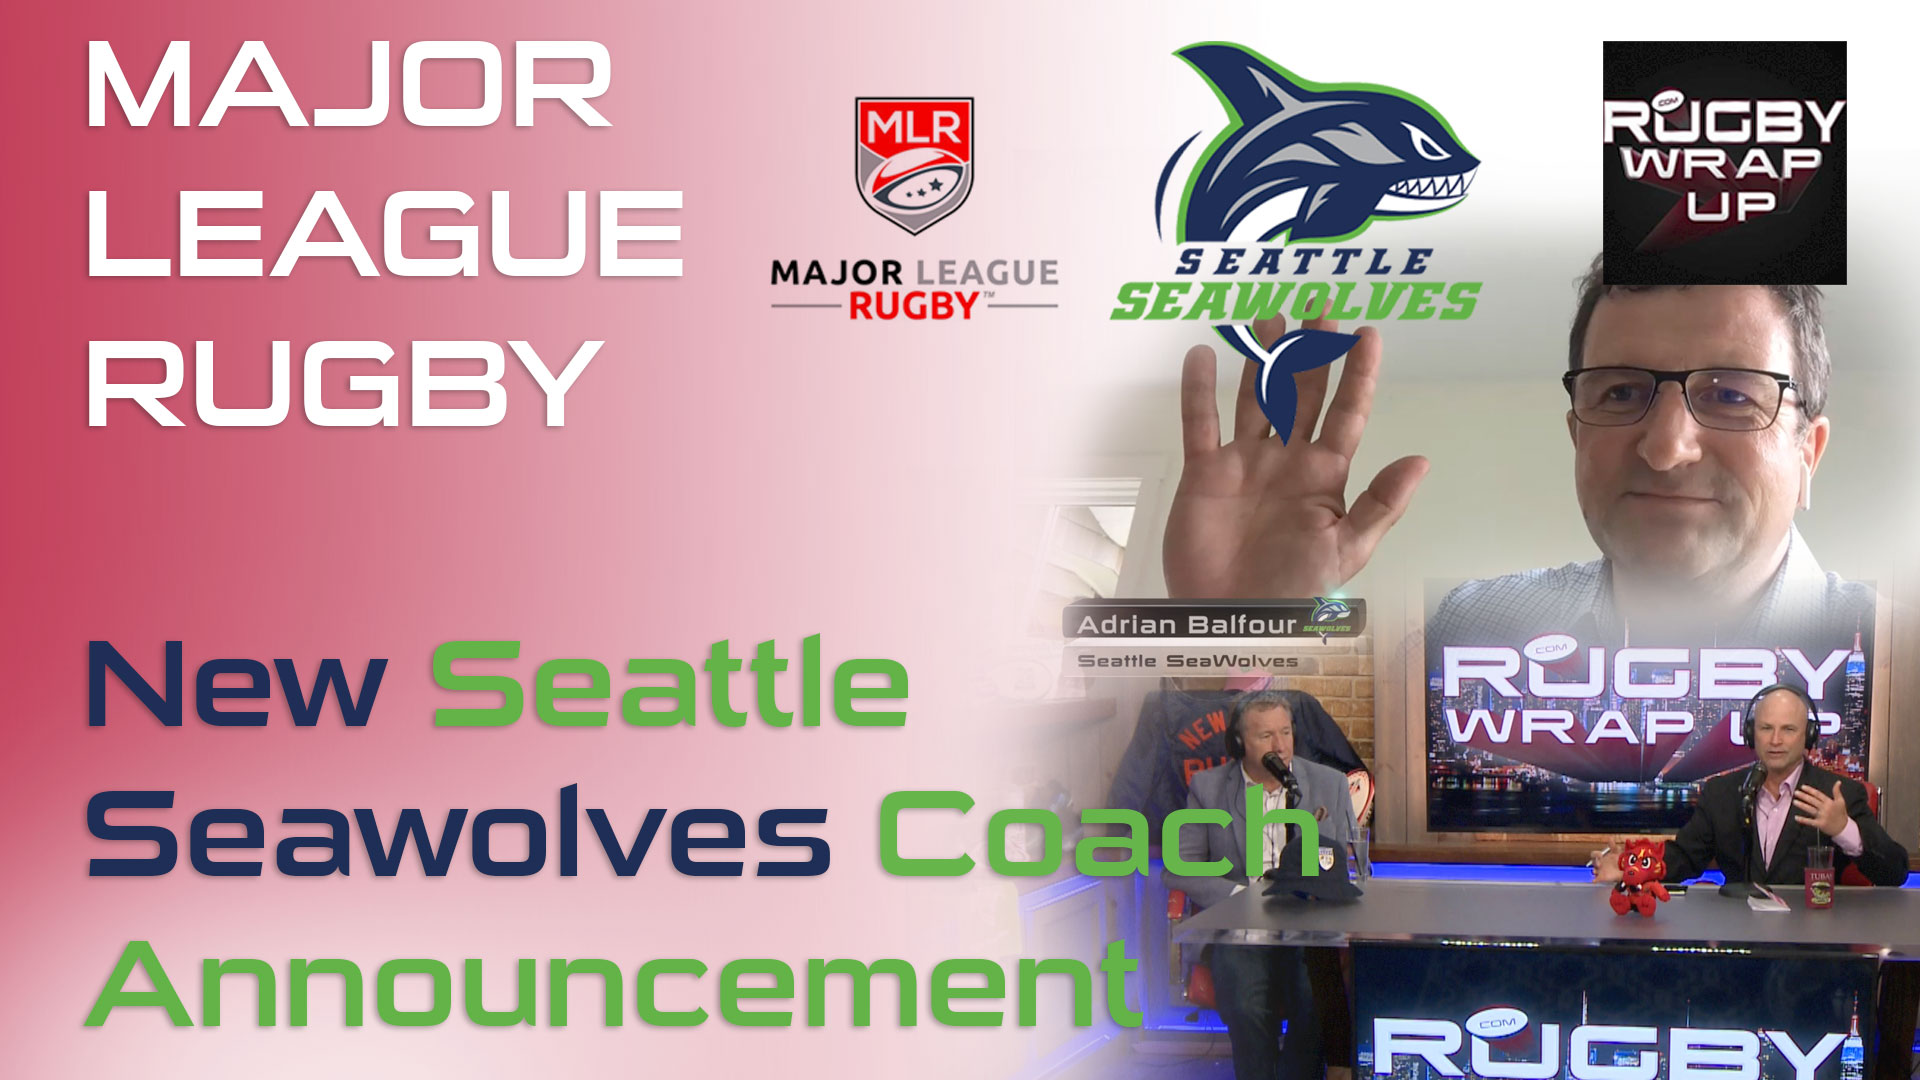 Rugby TV and Podcast: Seattle Seawolves Owner Adrian Balfour re Lawsuits, New Coach, Year 2, Rugby_Wrap_Up